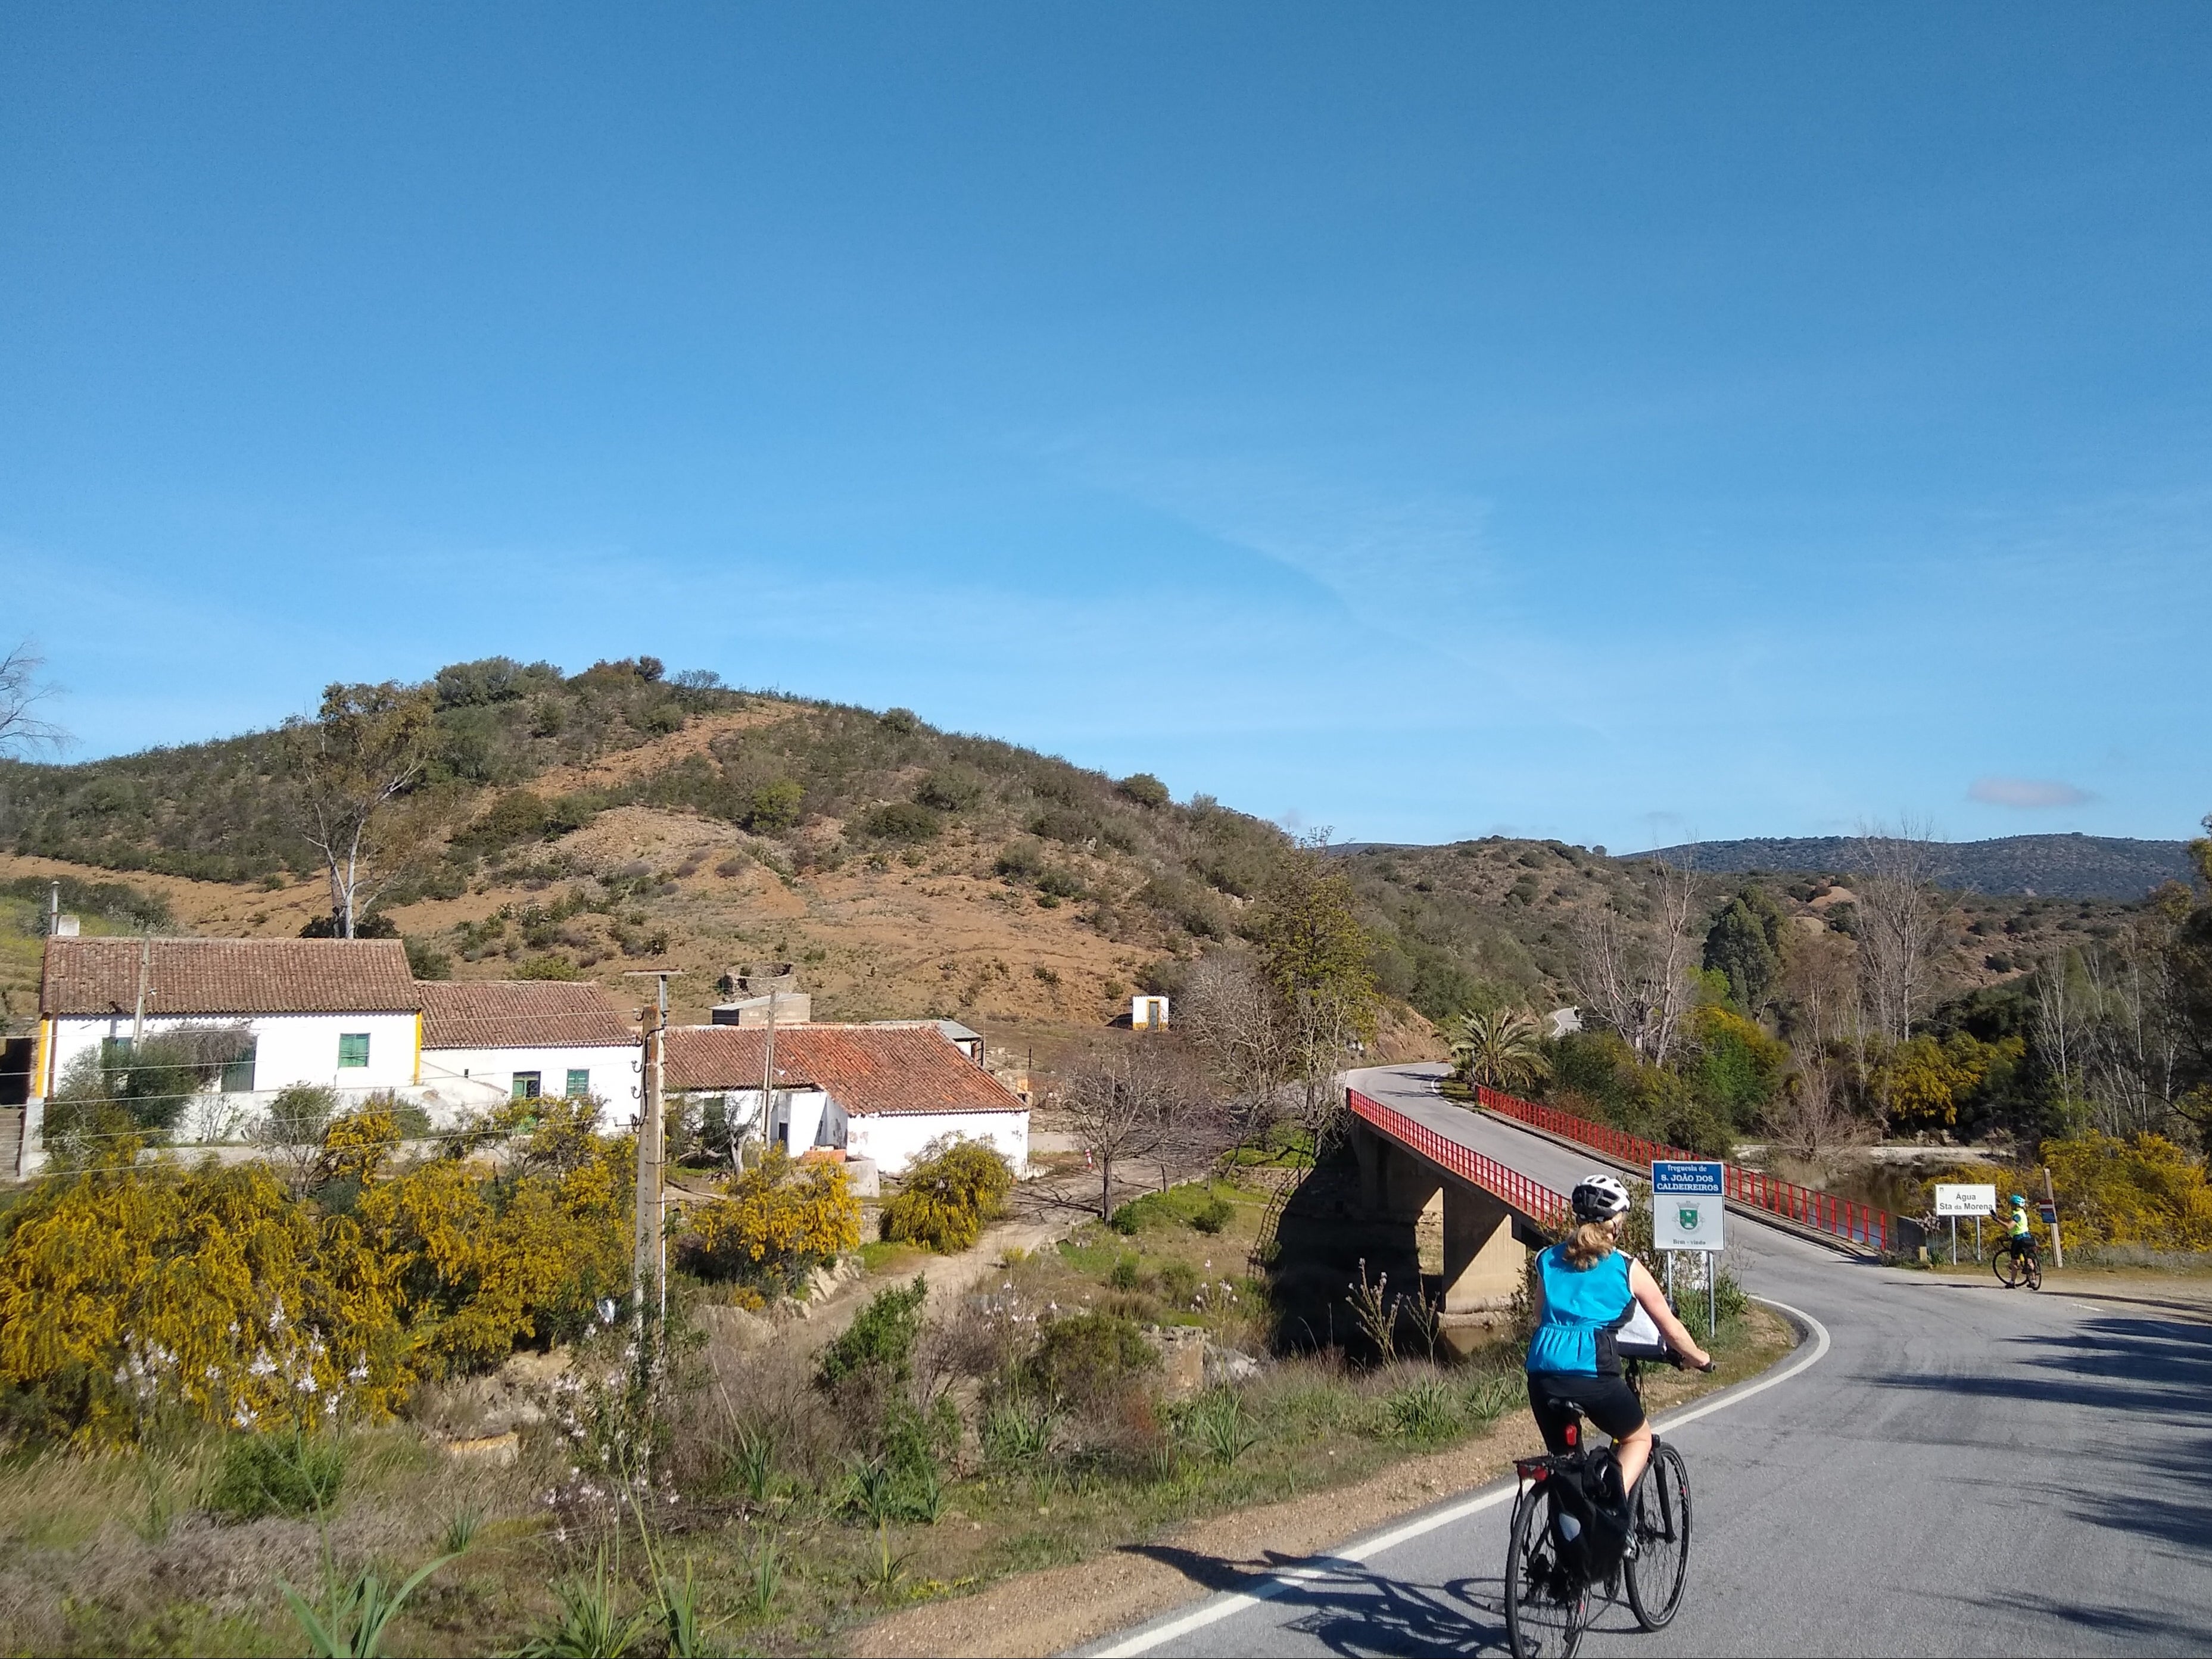 On the road to Almodovar: part of the Alentejo Circuit